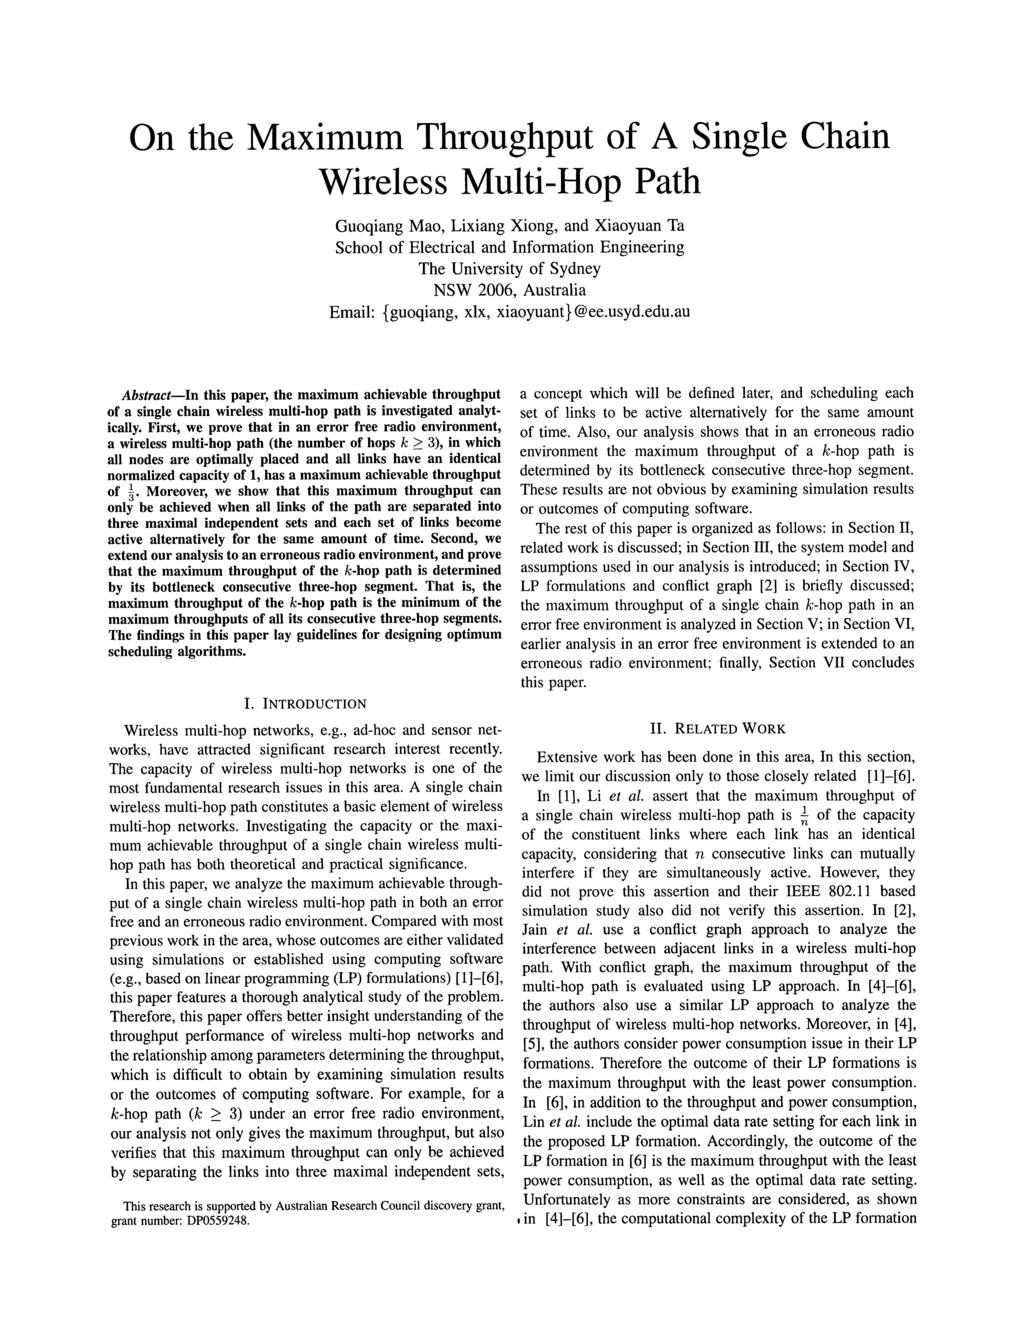 On the Maximum Throughput of A Single Chain Wireless Multi-Hop Path Guoqiang Mao, Lixiang Xiong, and Xiaoyuan Ta School of Electrical and Information Engineering The University of Sydney NSW 2006,